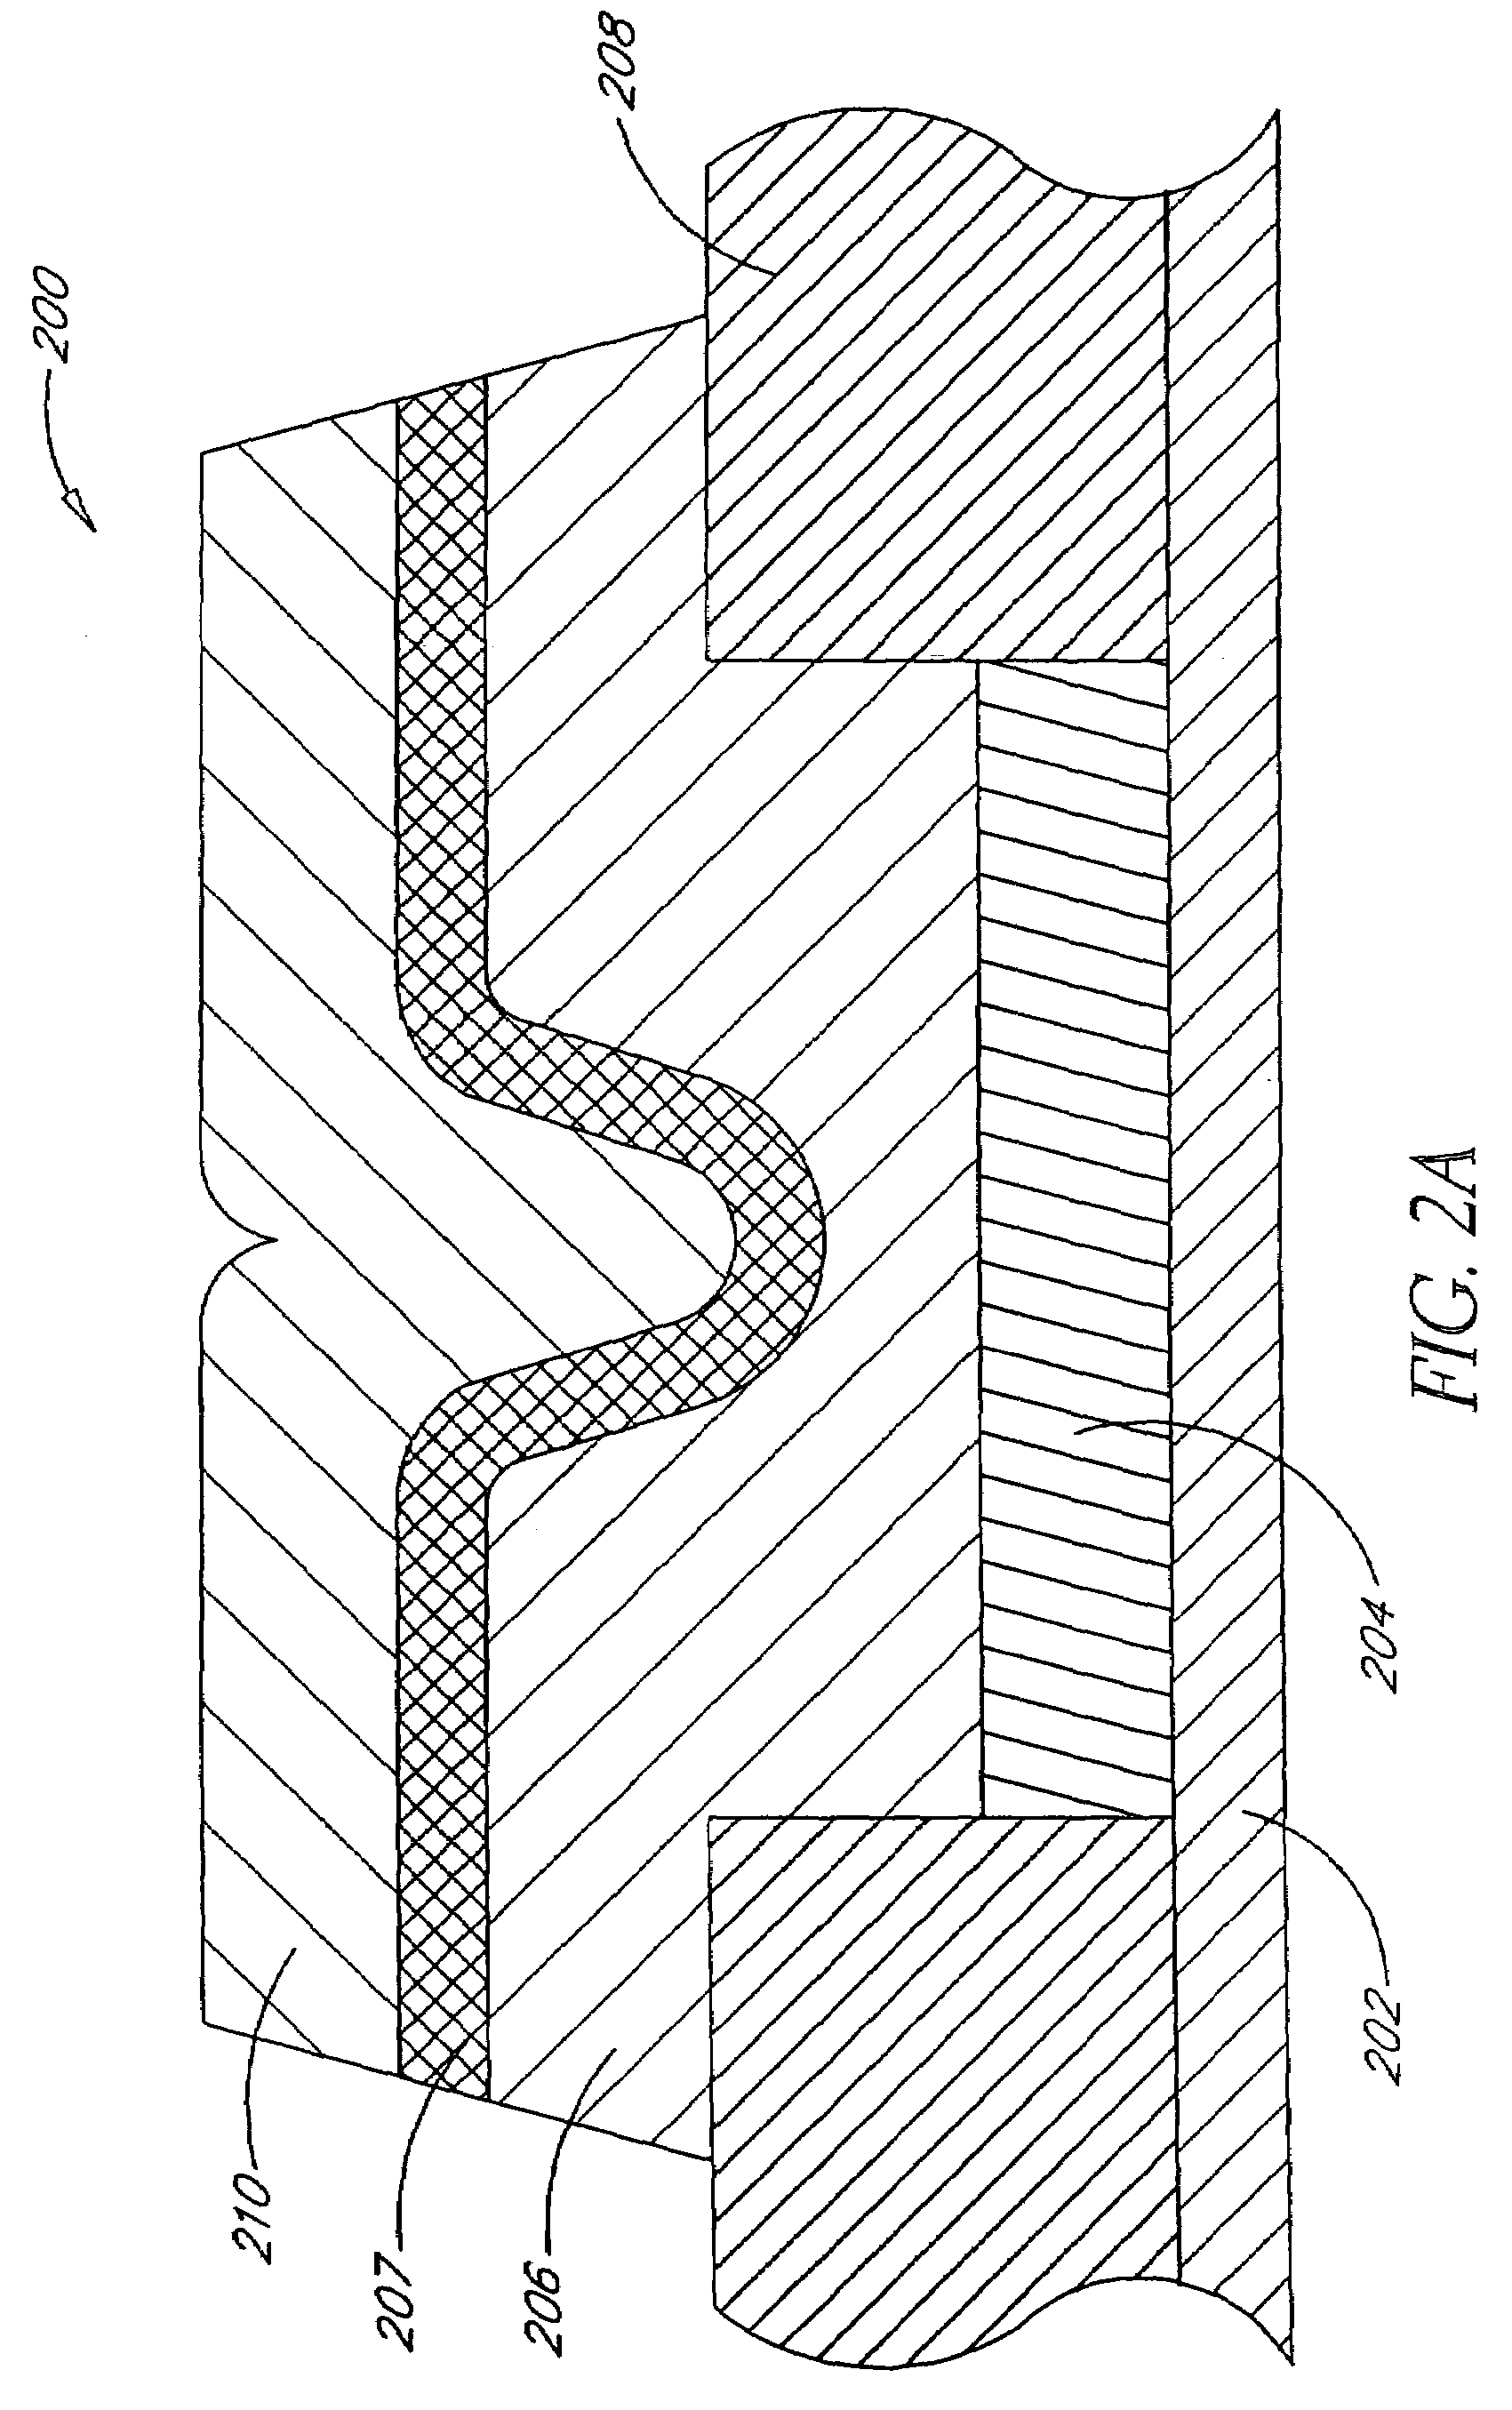 Methods to form a memory cell with metal-rich metal chalcogenide